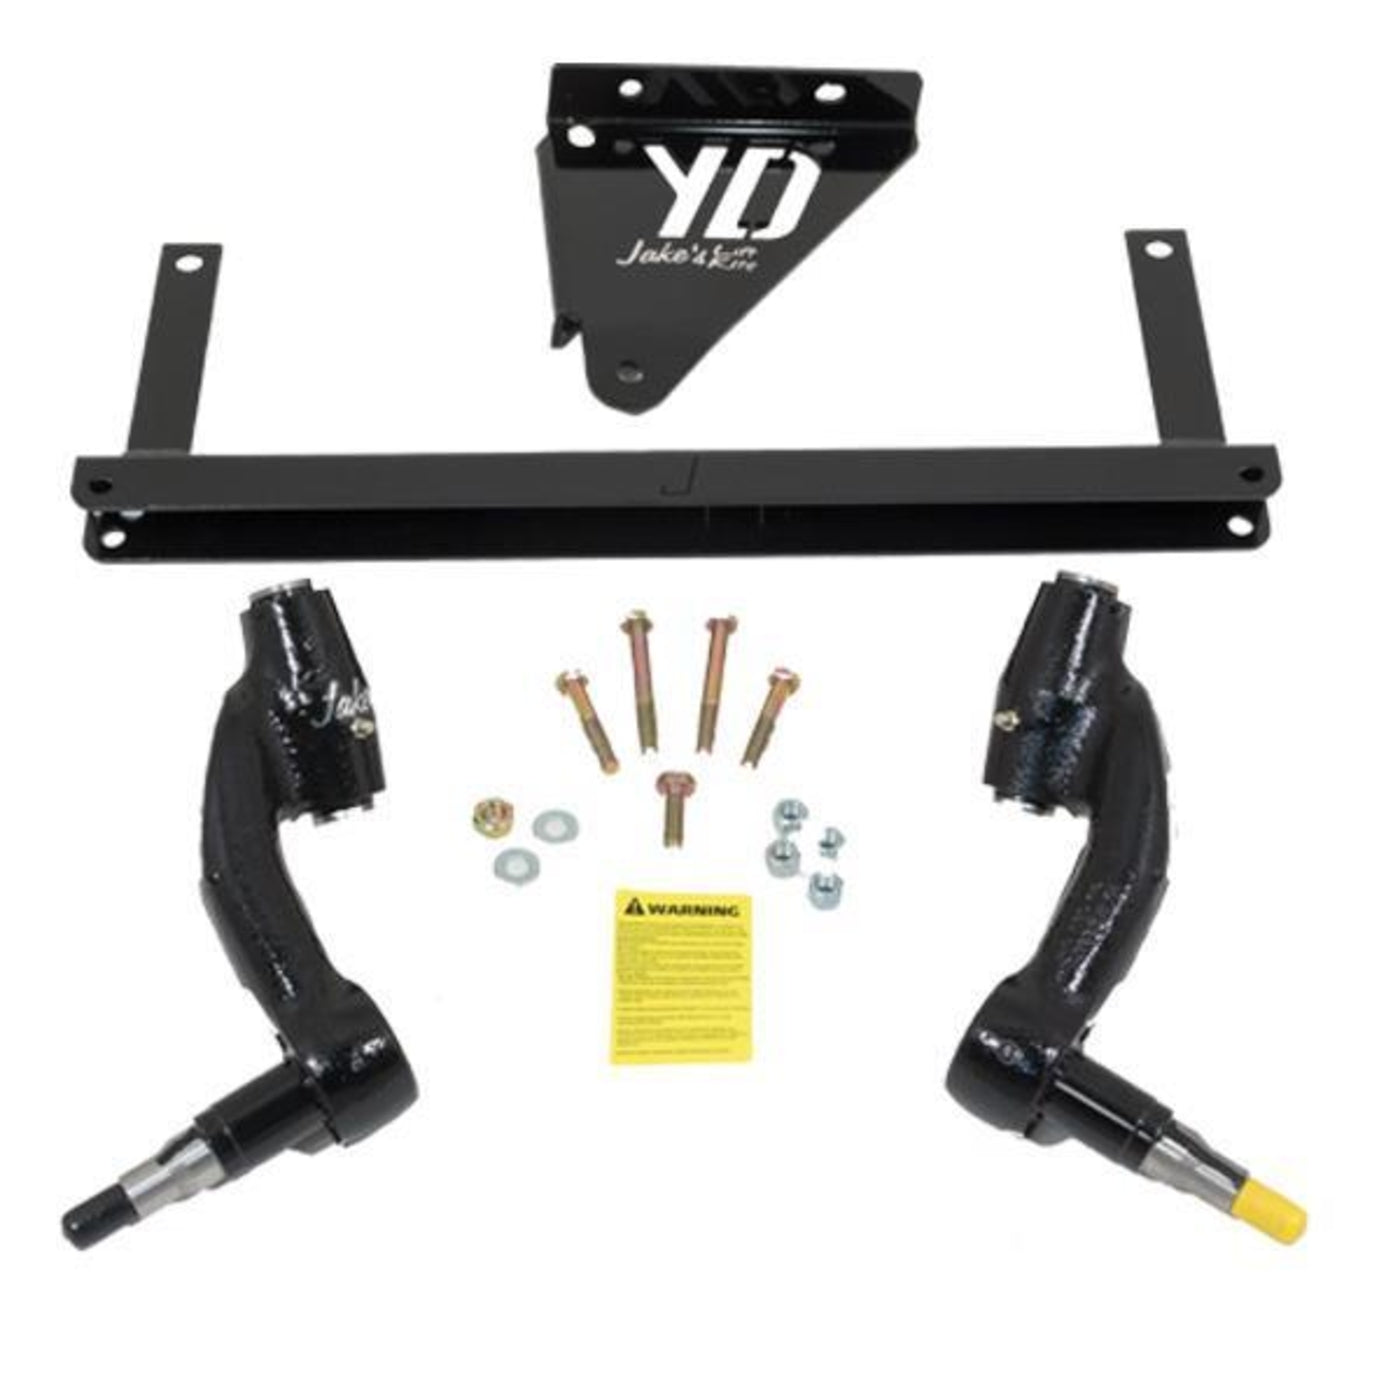 Jake's Yamaha Electric Drive2 6" Spindle Lift Kit (Years 2017-Up)